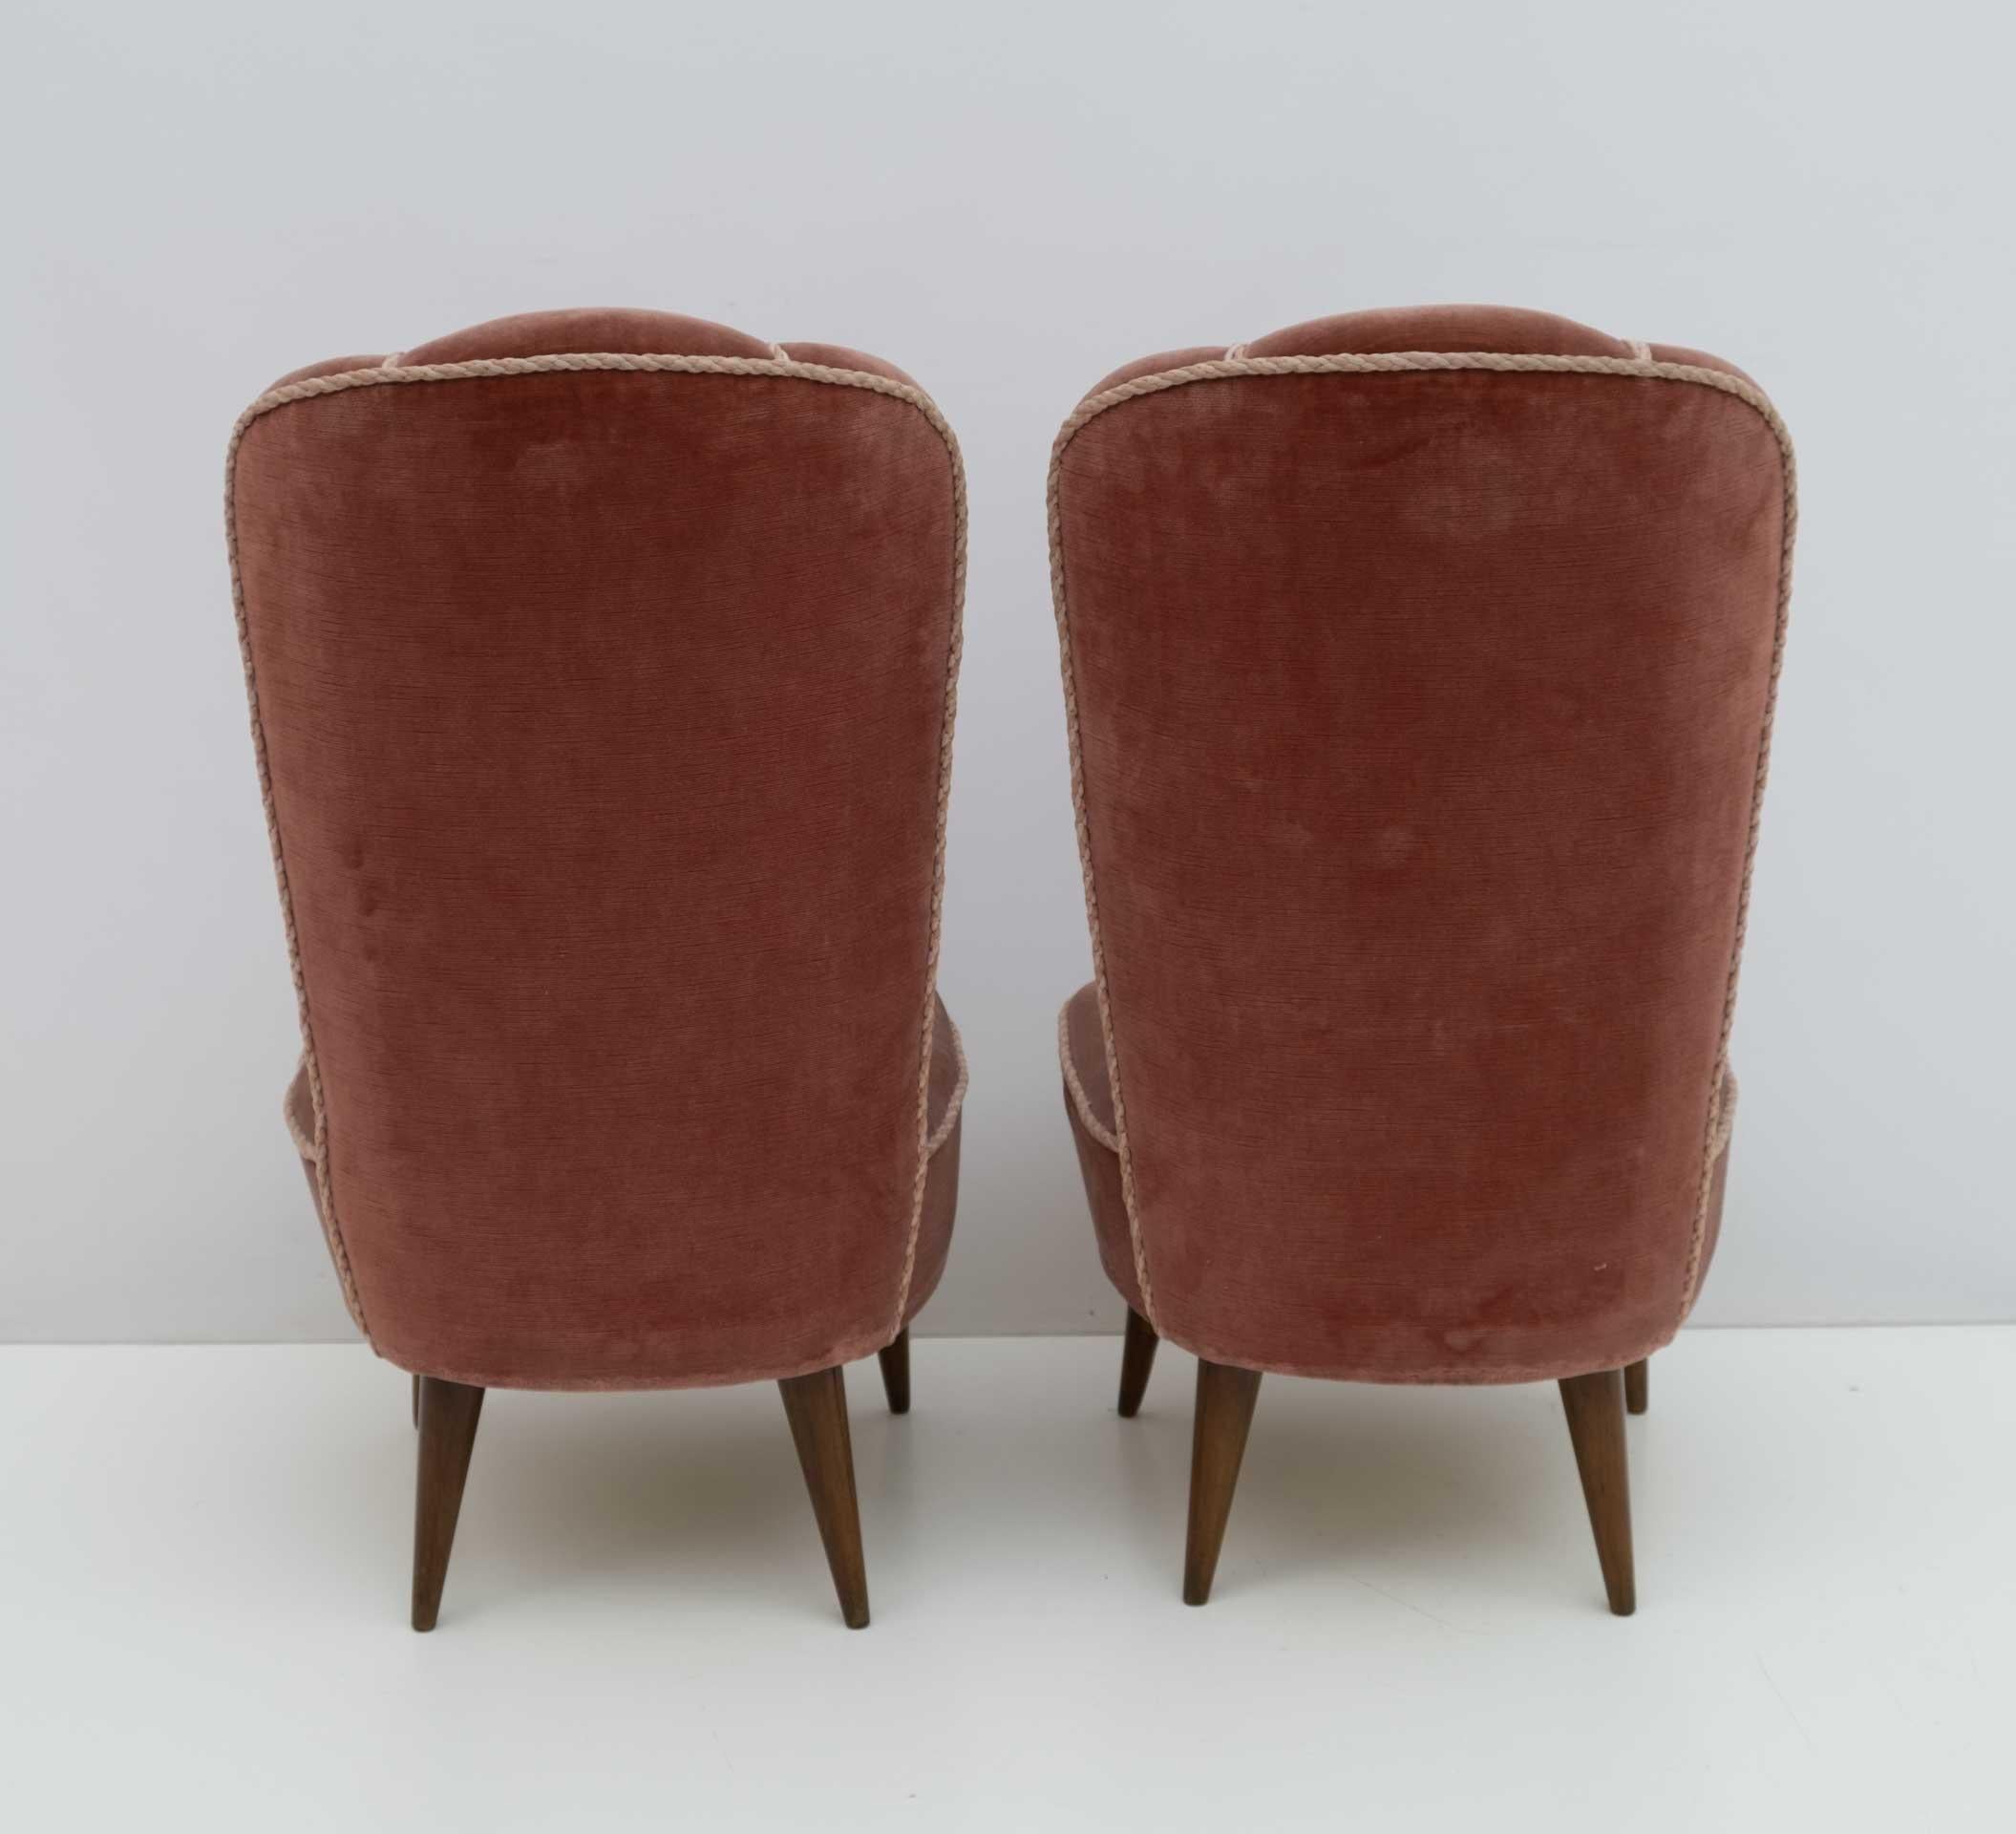 Attributed Gio Ponti Mid-Century Italian Small Armchairs by ISA Bergamo, Pair For Sale 1